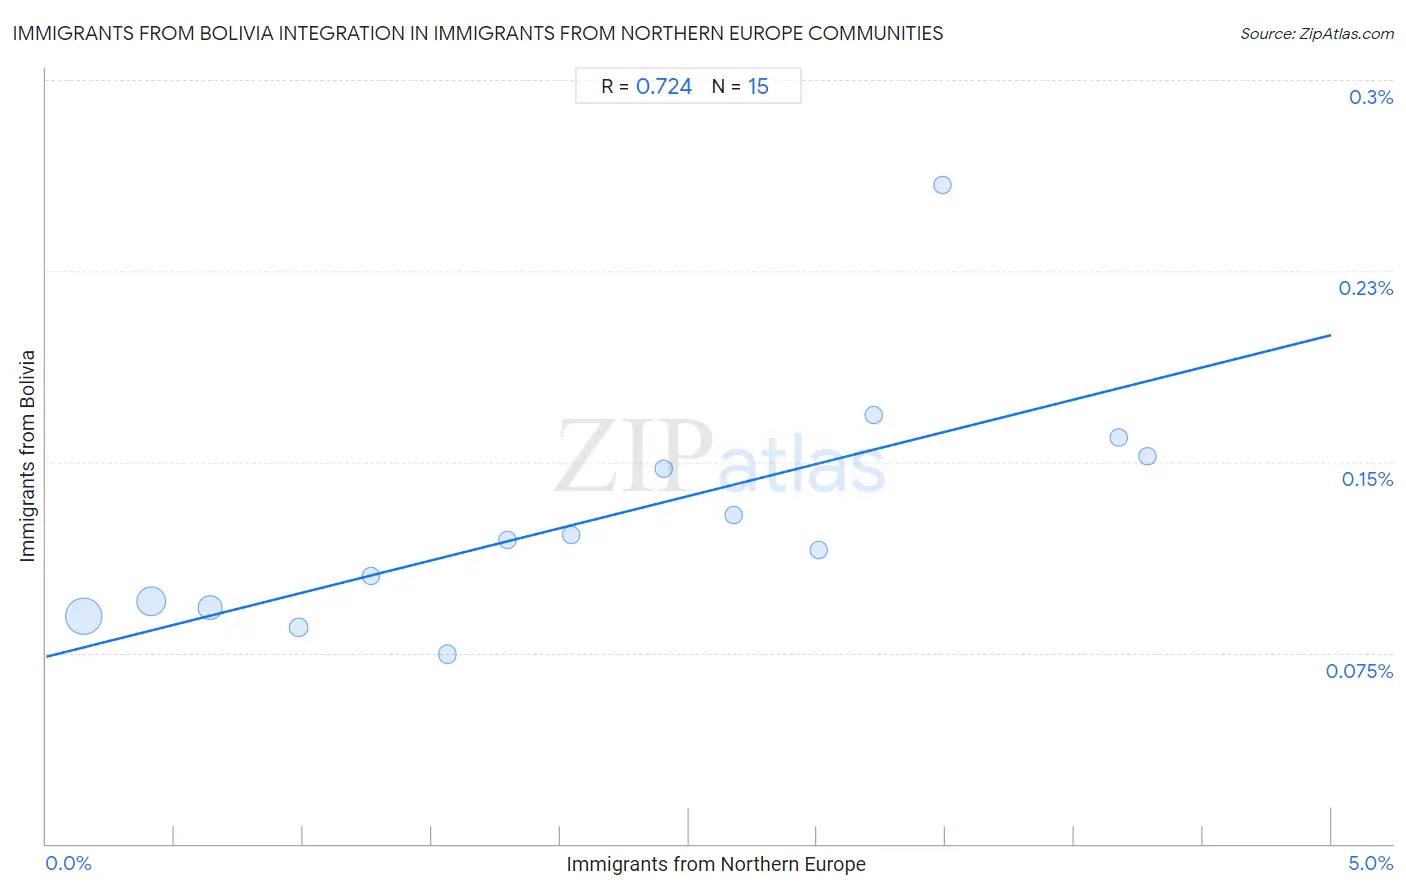 Immigrants from Northern Europe Integration in Immigrants from Bolivia Communities